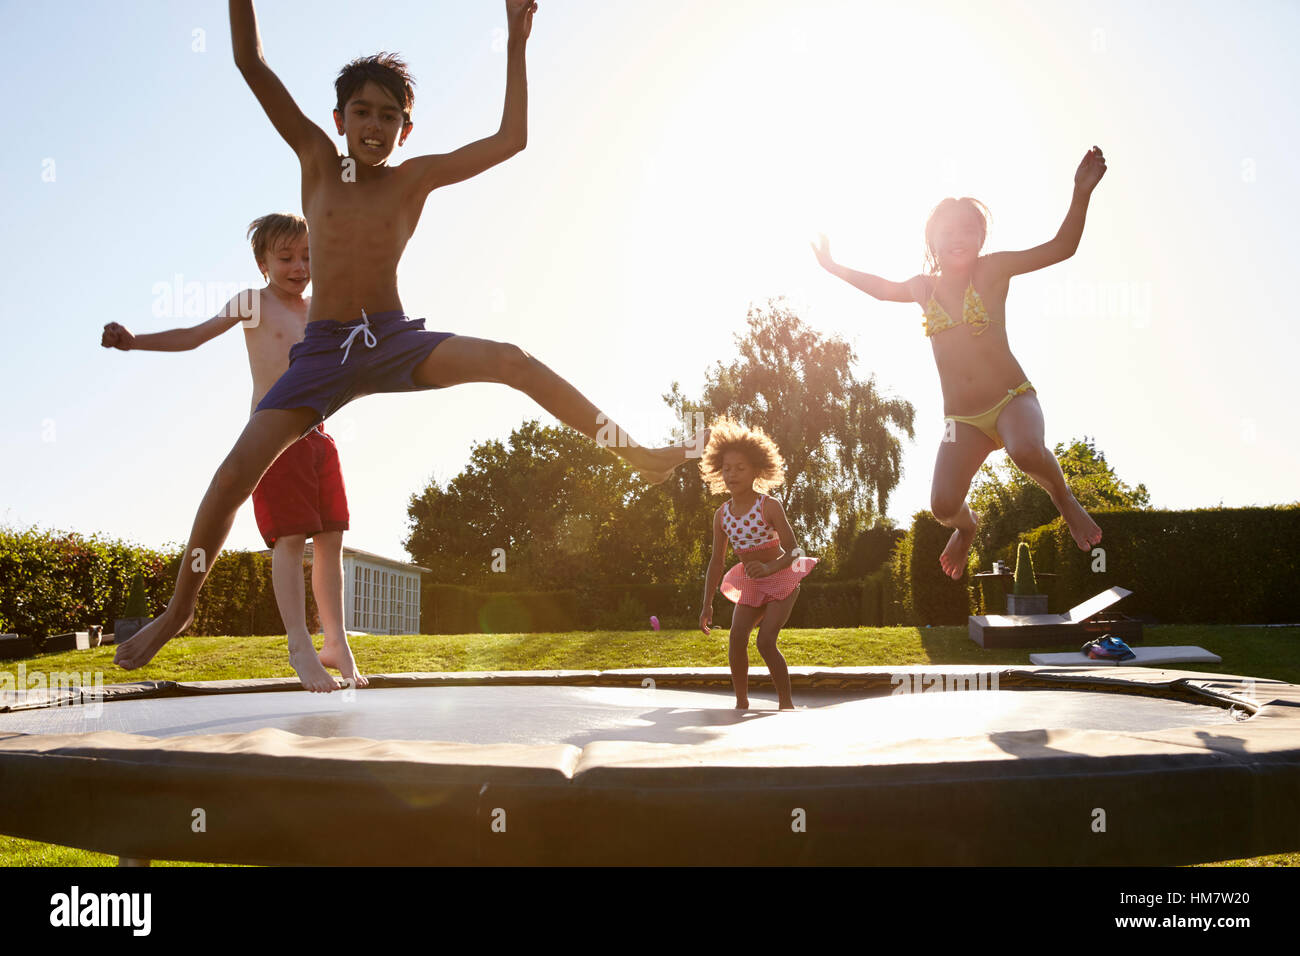 Group Of Children Having Fun Jumping On Outdoor Trampoline Stock Photo